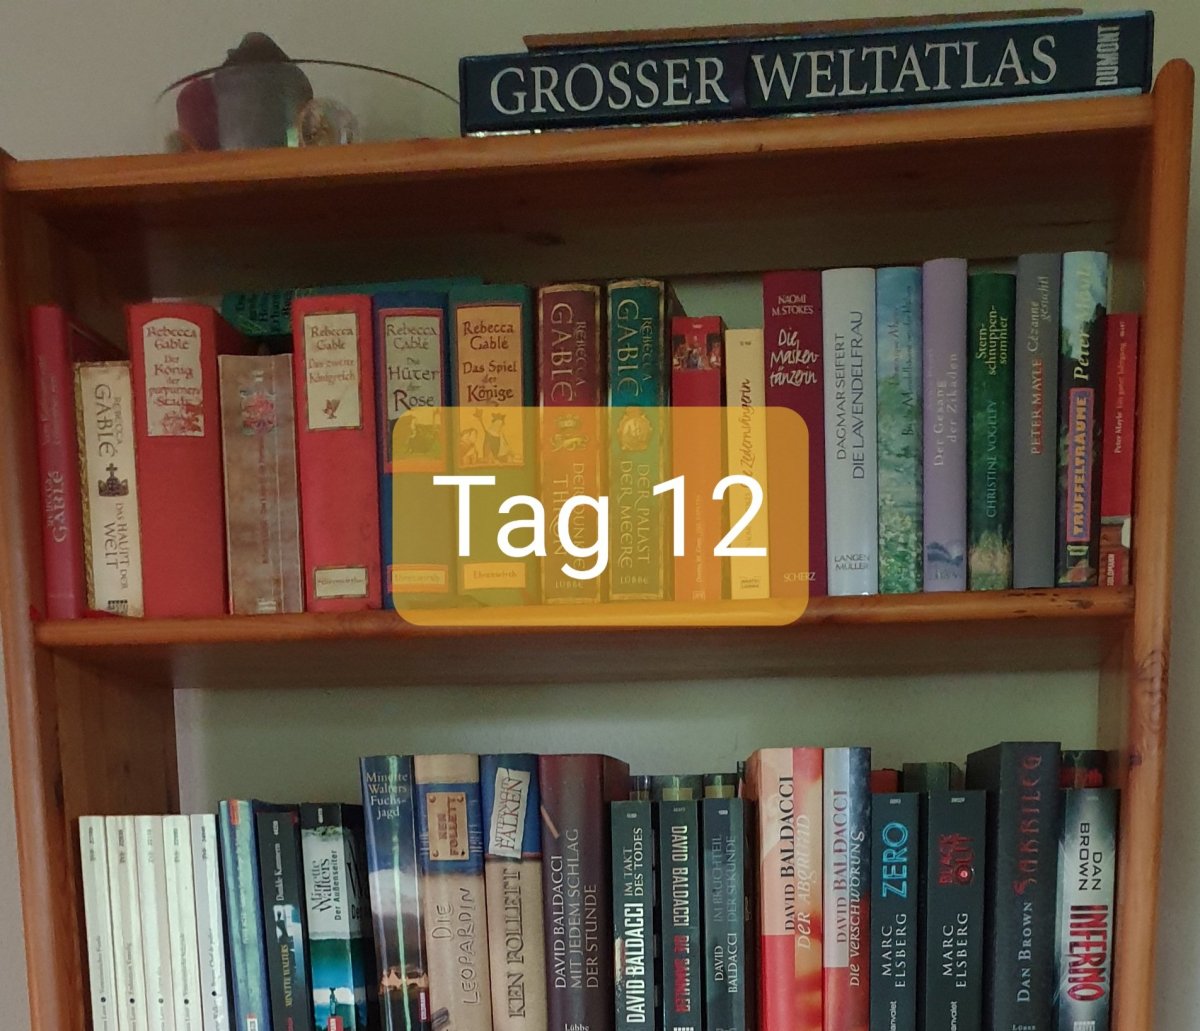 30 Days Book Challenge – Tag 12